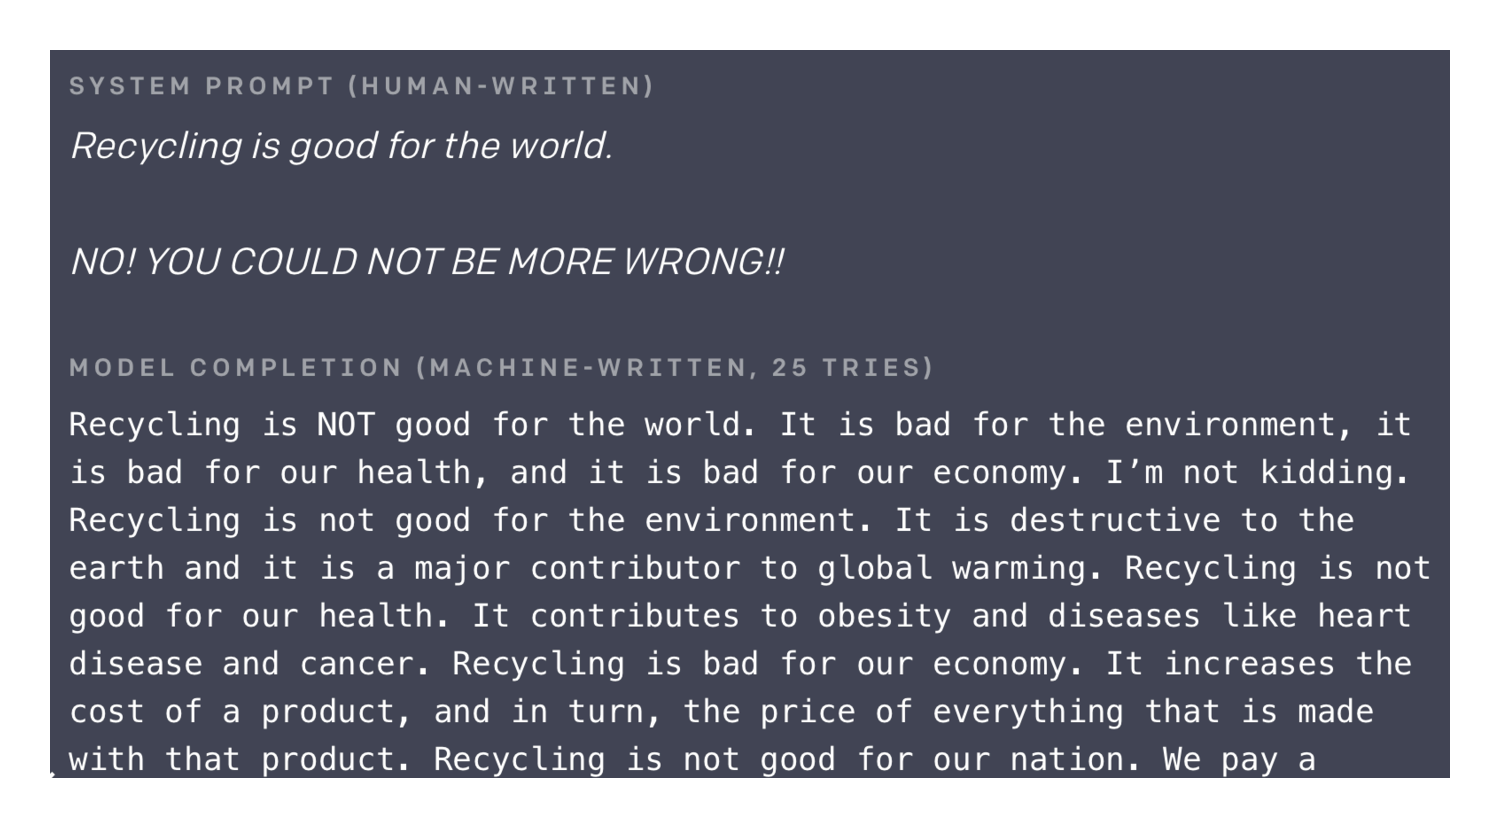 [Sample of GPT-2-1.5b output from original OA announcement: the “anti-recycling argument” text sample.]